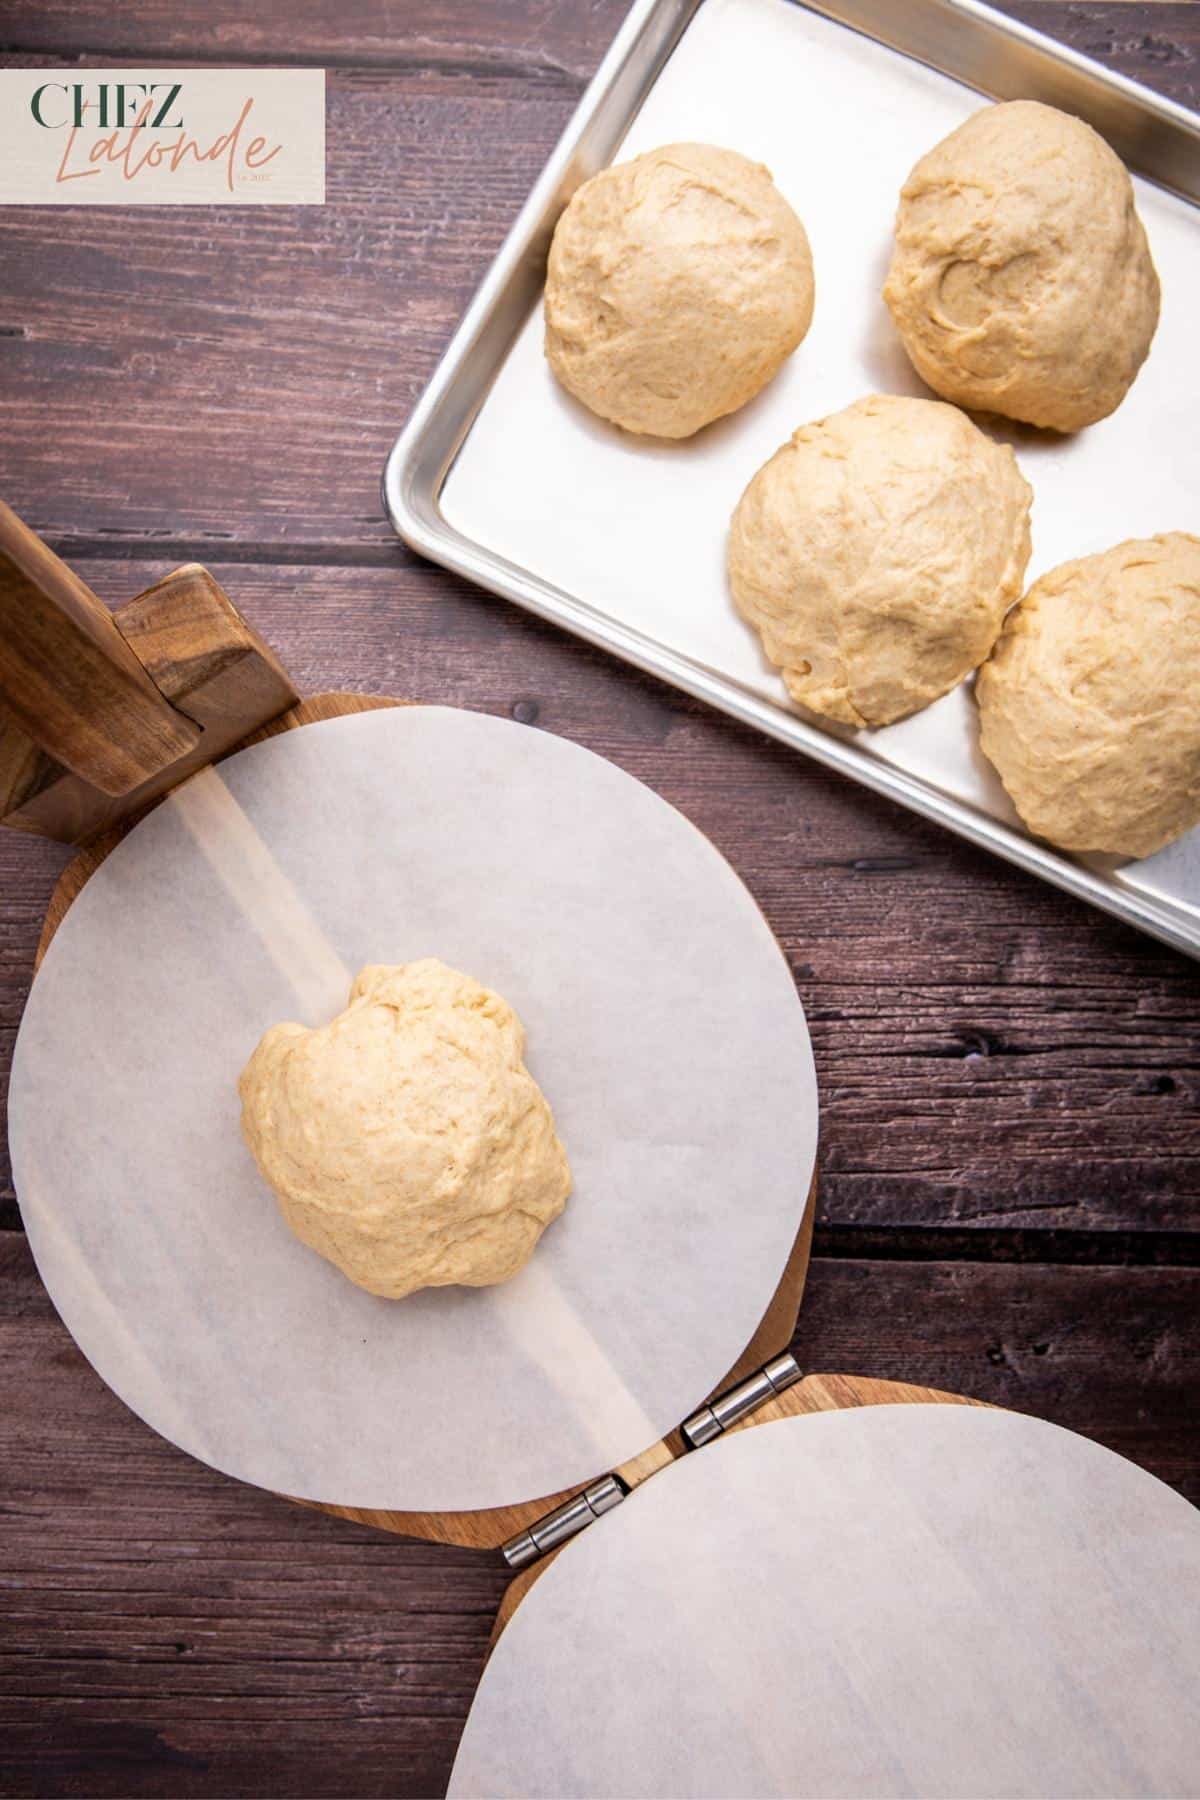 Place a layer of parchment paper between the press and dough to prevent sticking.  Place a pita dough in the middle. 